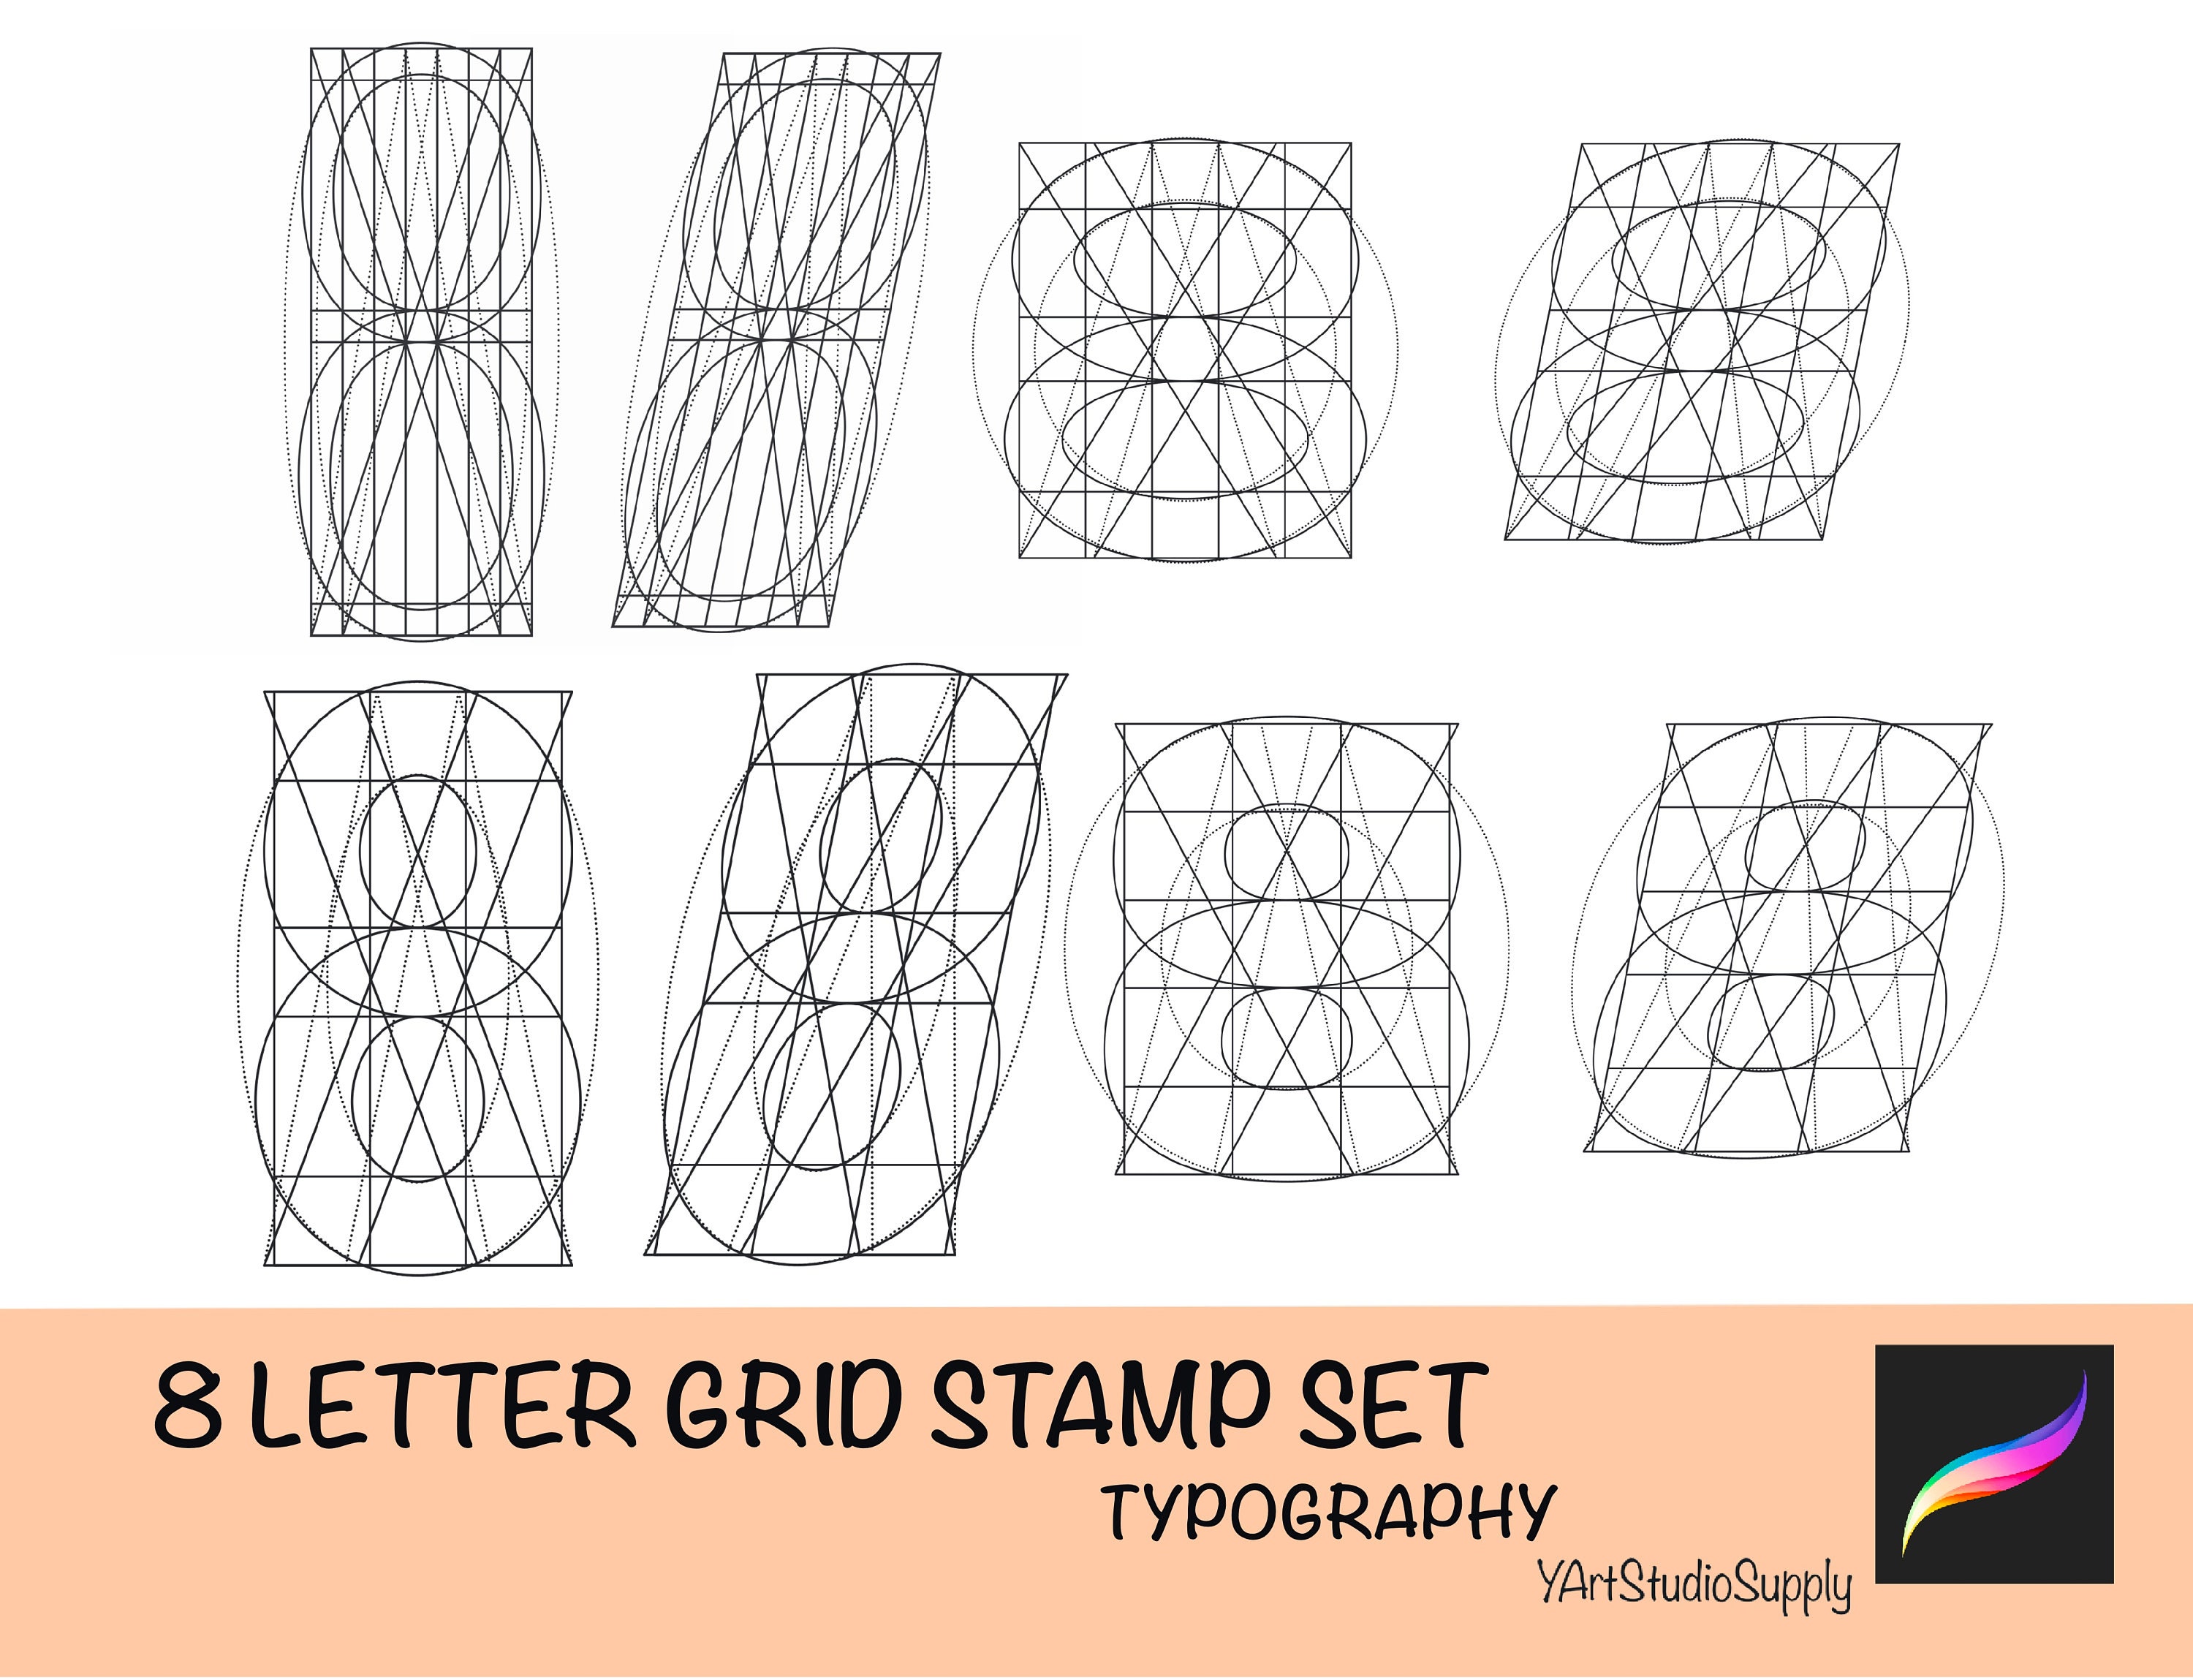 2023 Calendar grids stamps for Procreate By LettersClipArt